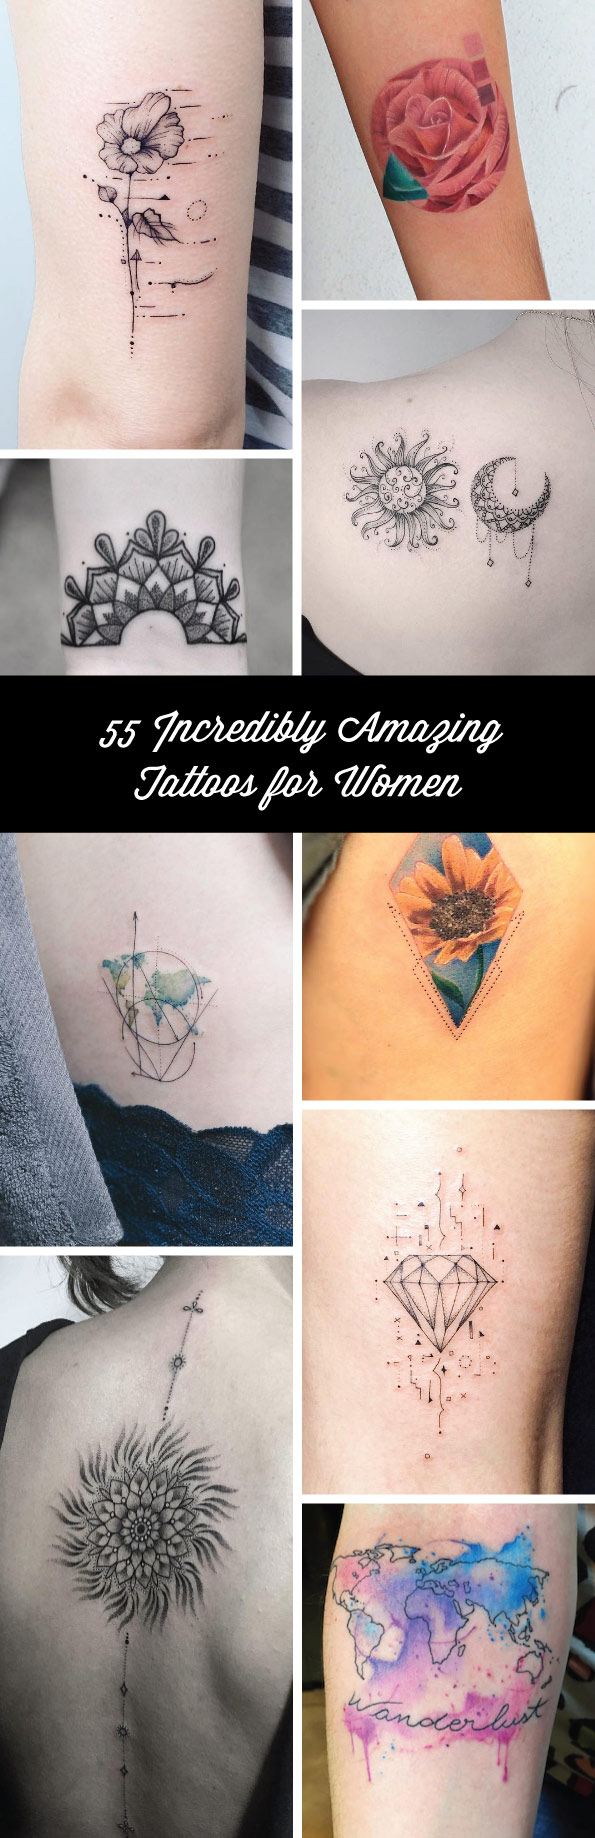 55 Incredibly Amazing Tattoos for Women | TattooBlend